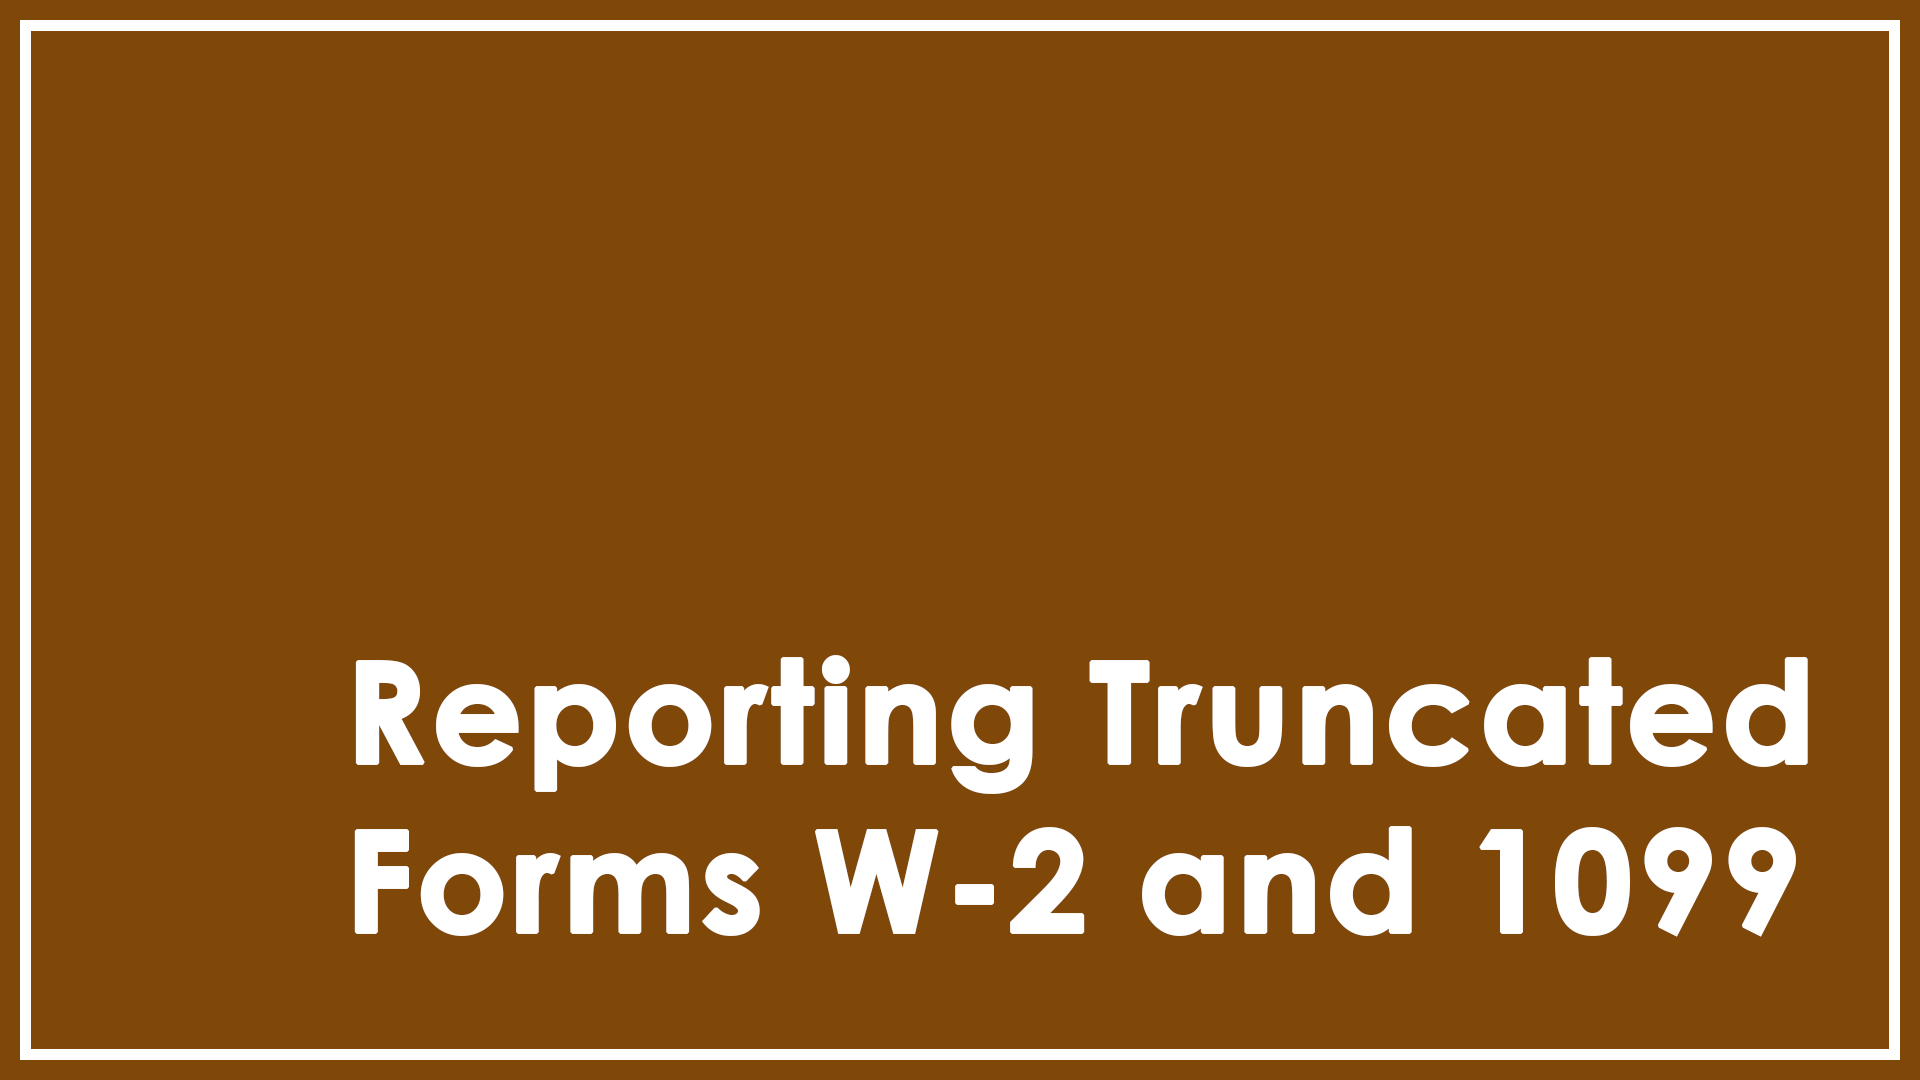 Truncated Forms W-2 and 1099